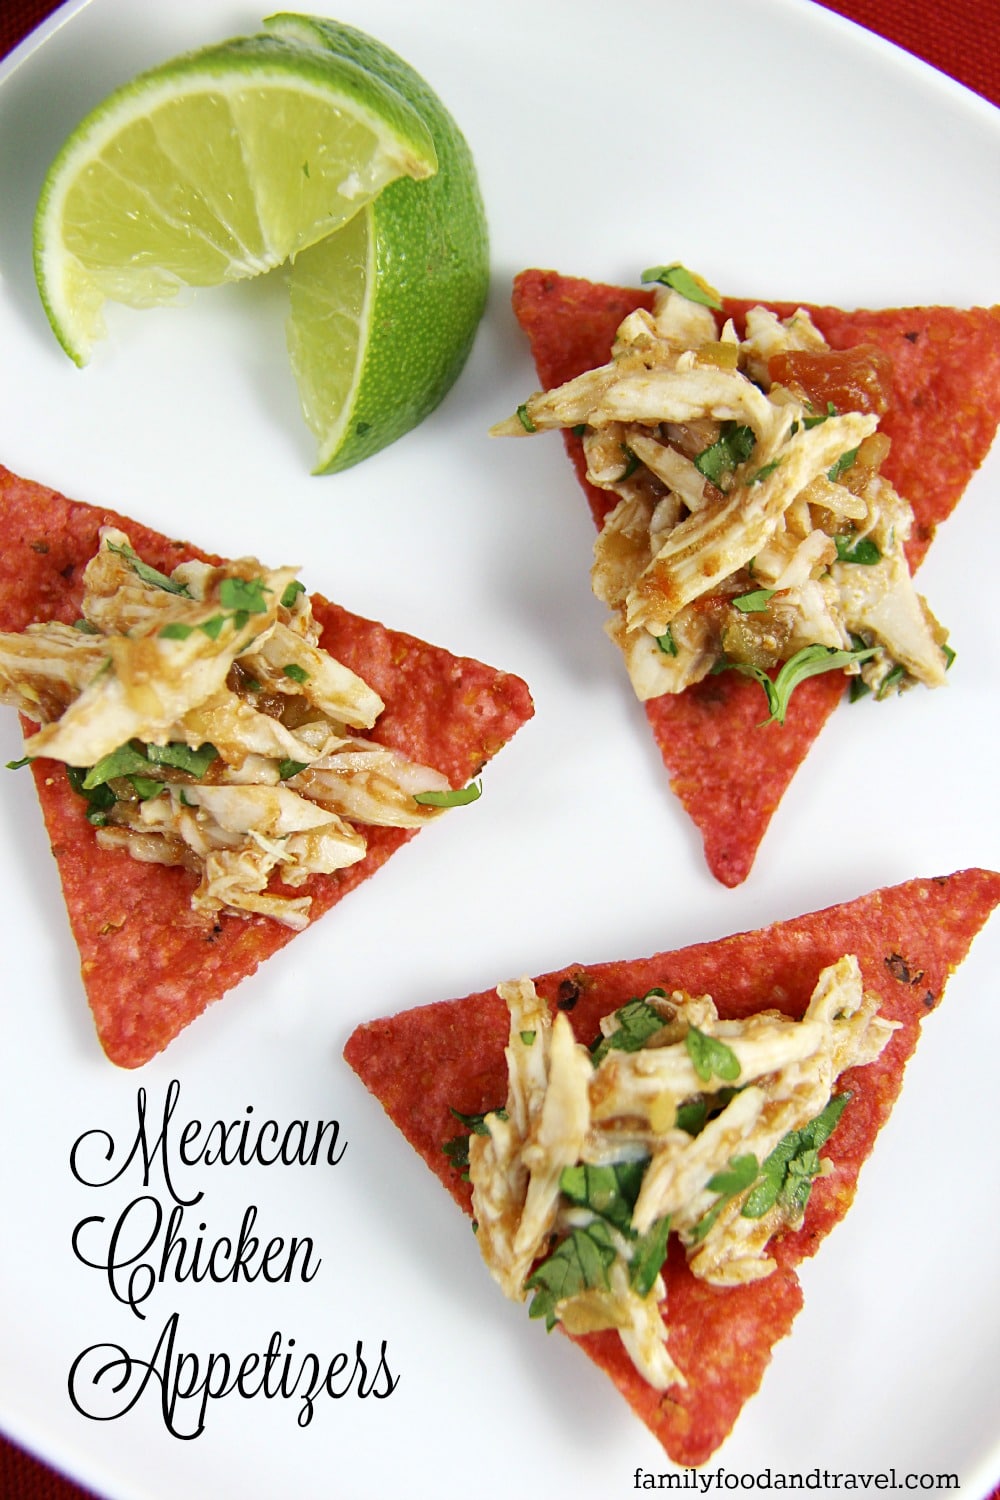 Mexican Chicken Appetizers